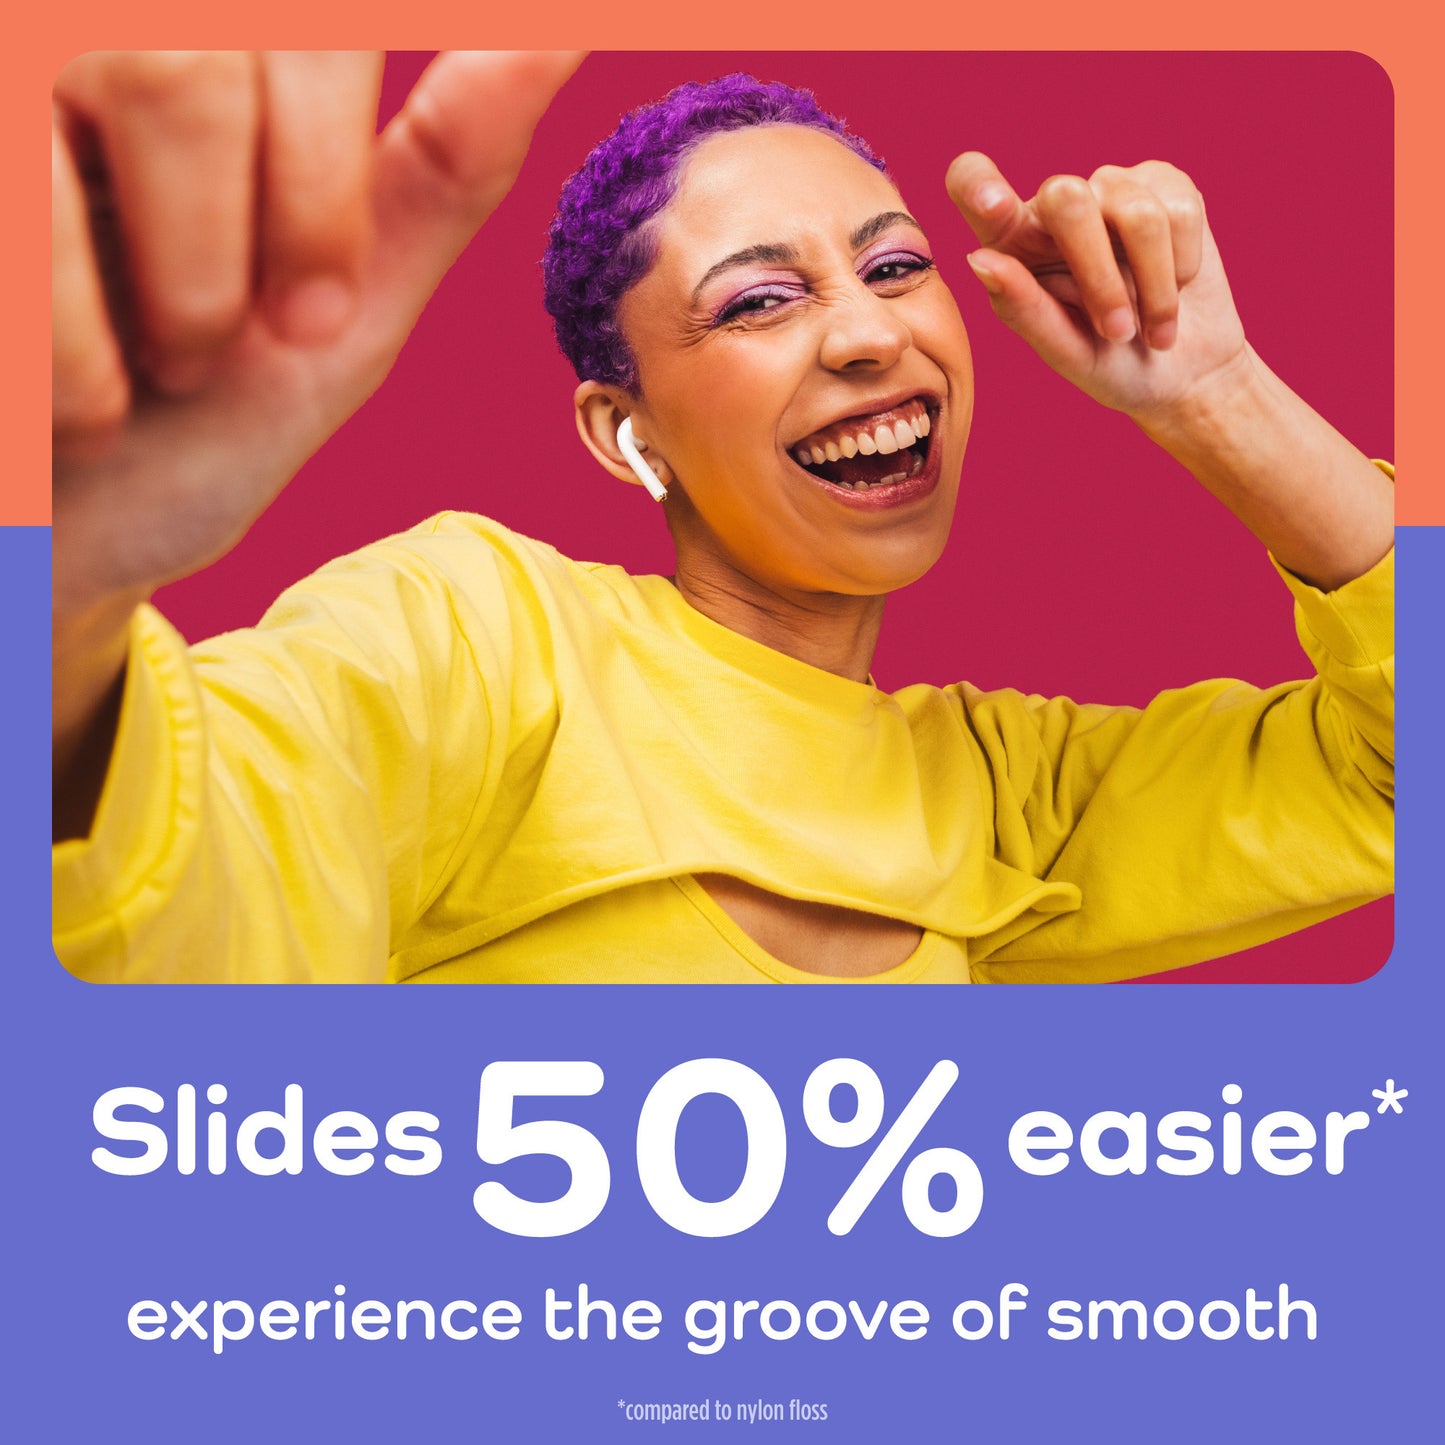 Slides 50% easier. Experience the groove of smooth